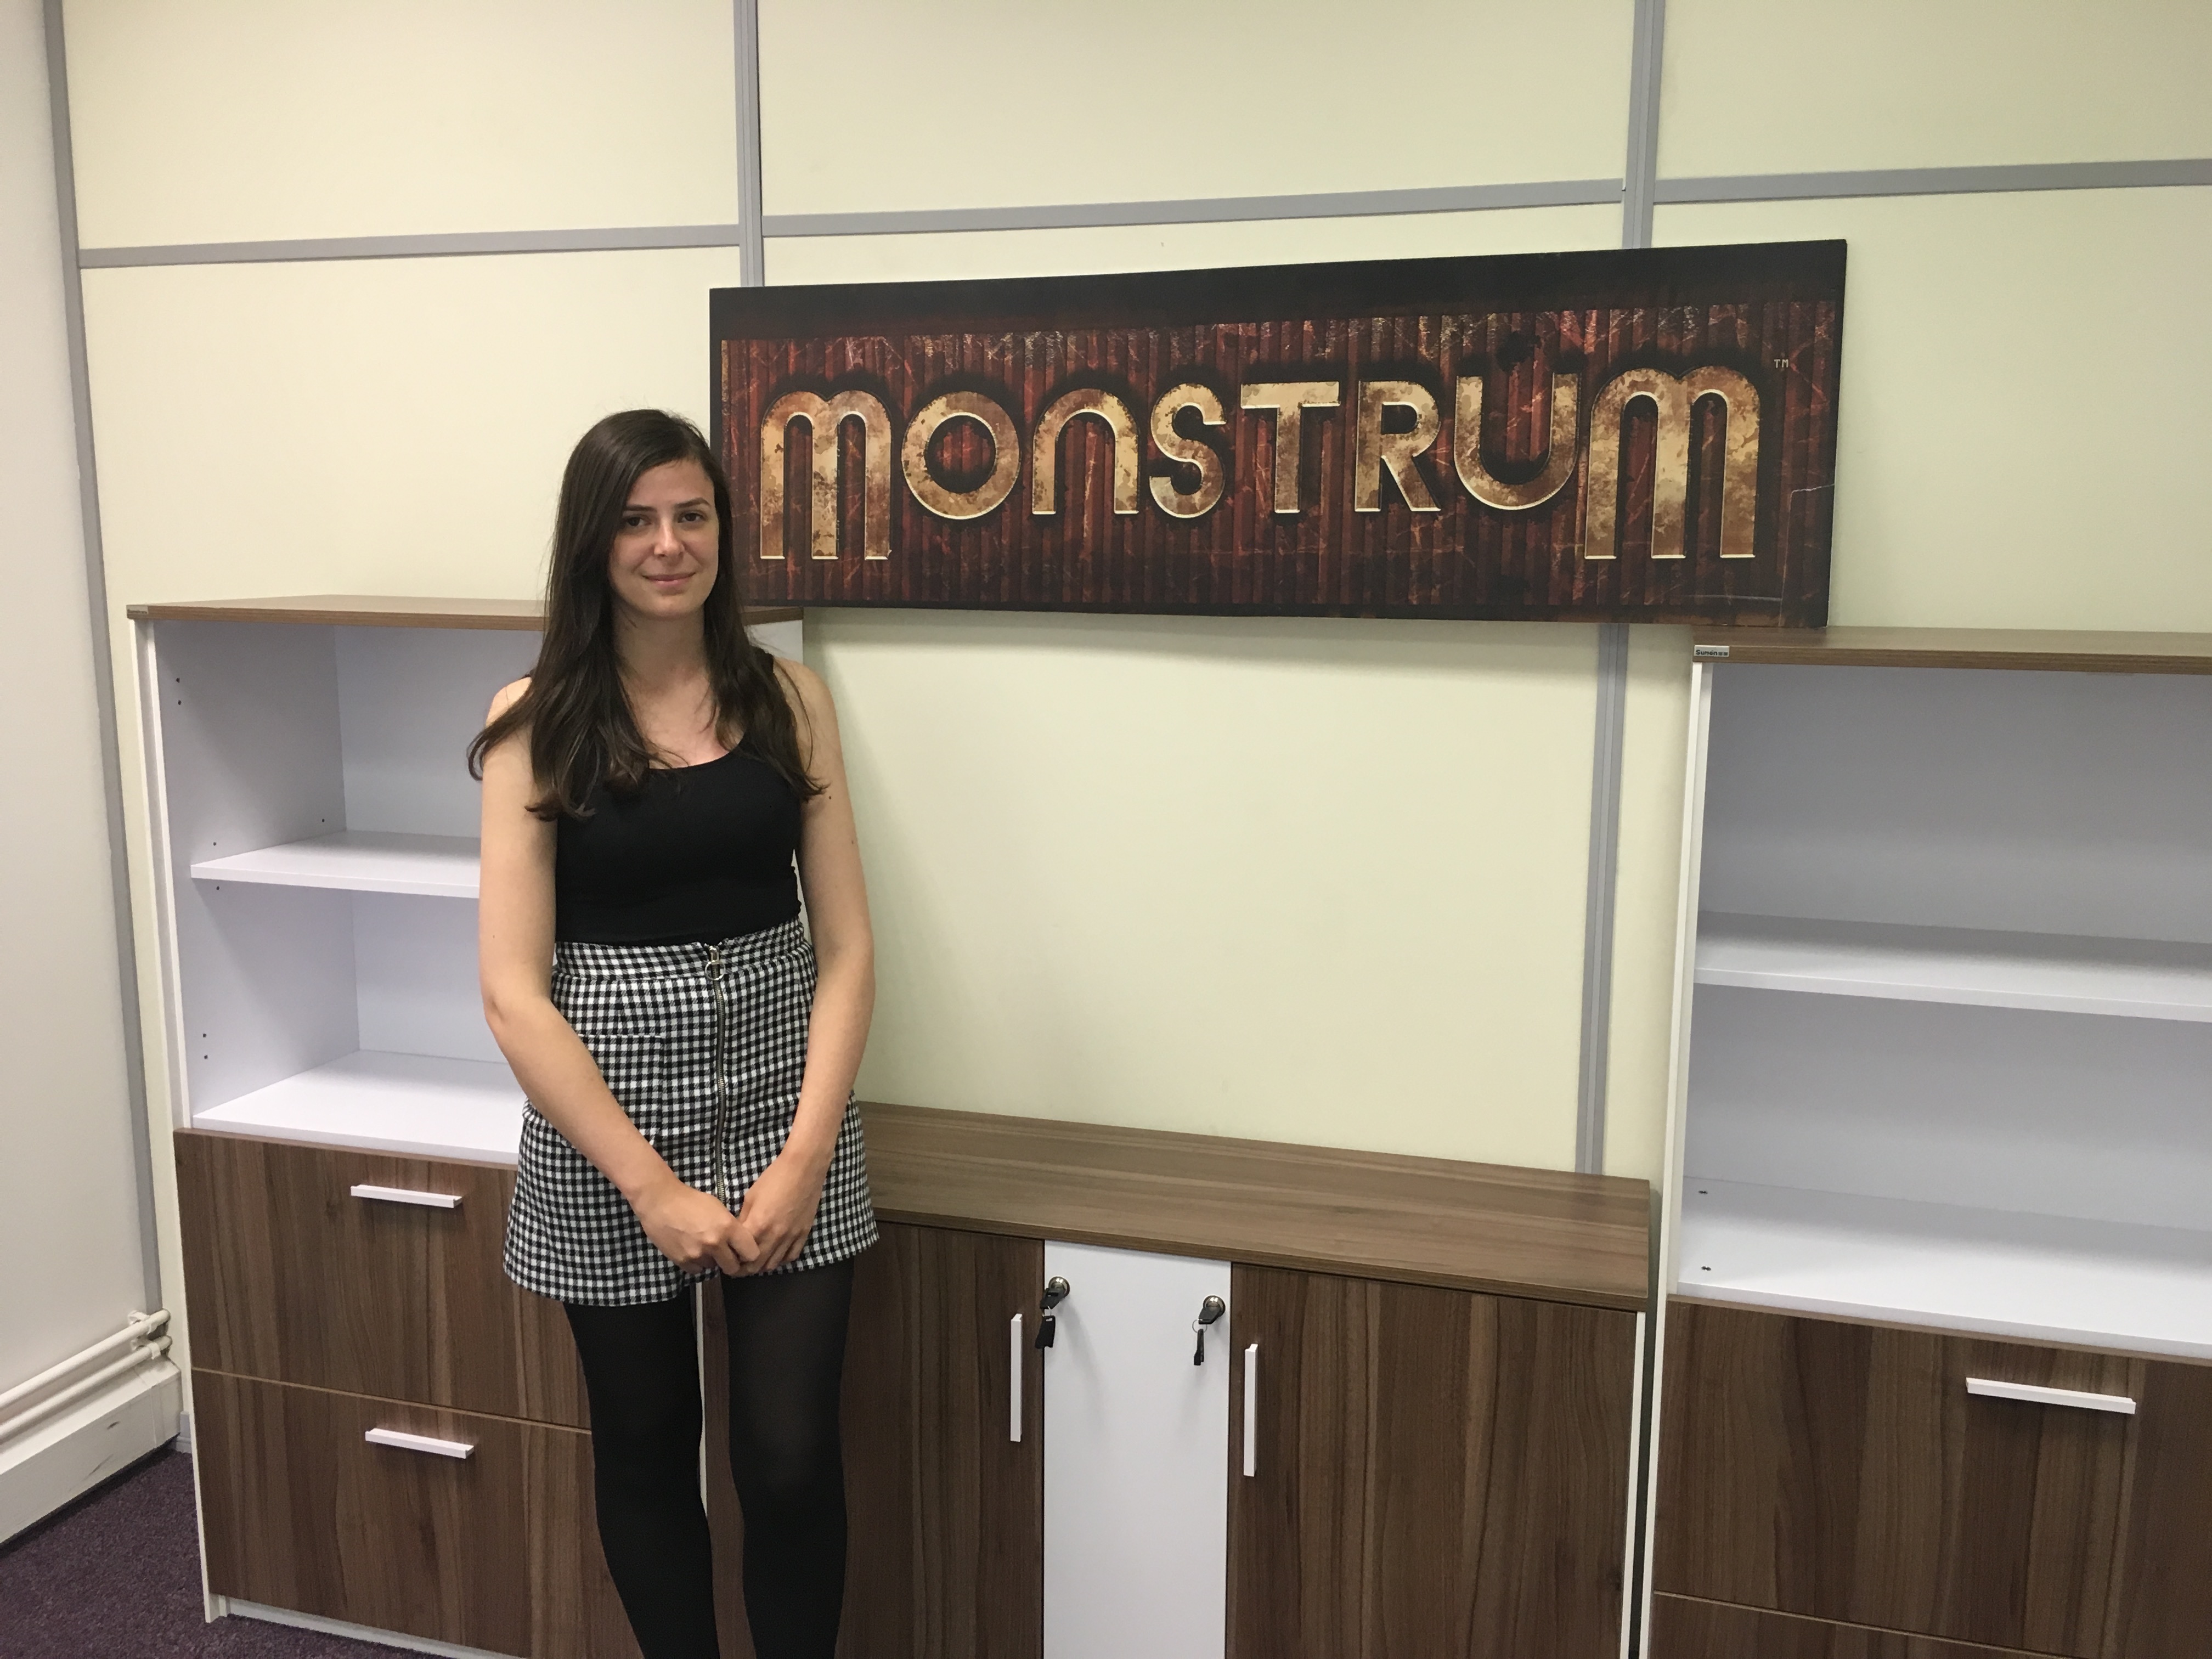 A picture of Stephanie Bayzeley by the logo for the game Monstrum